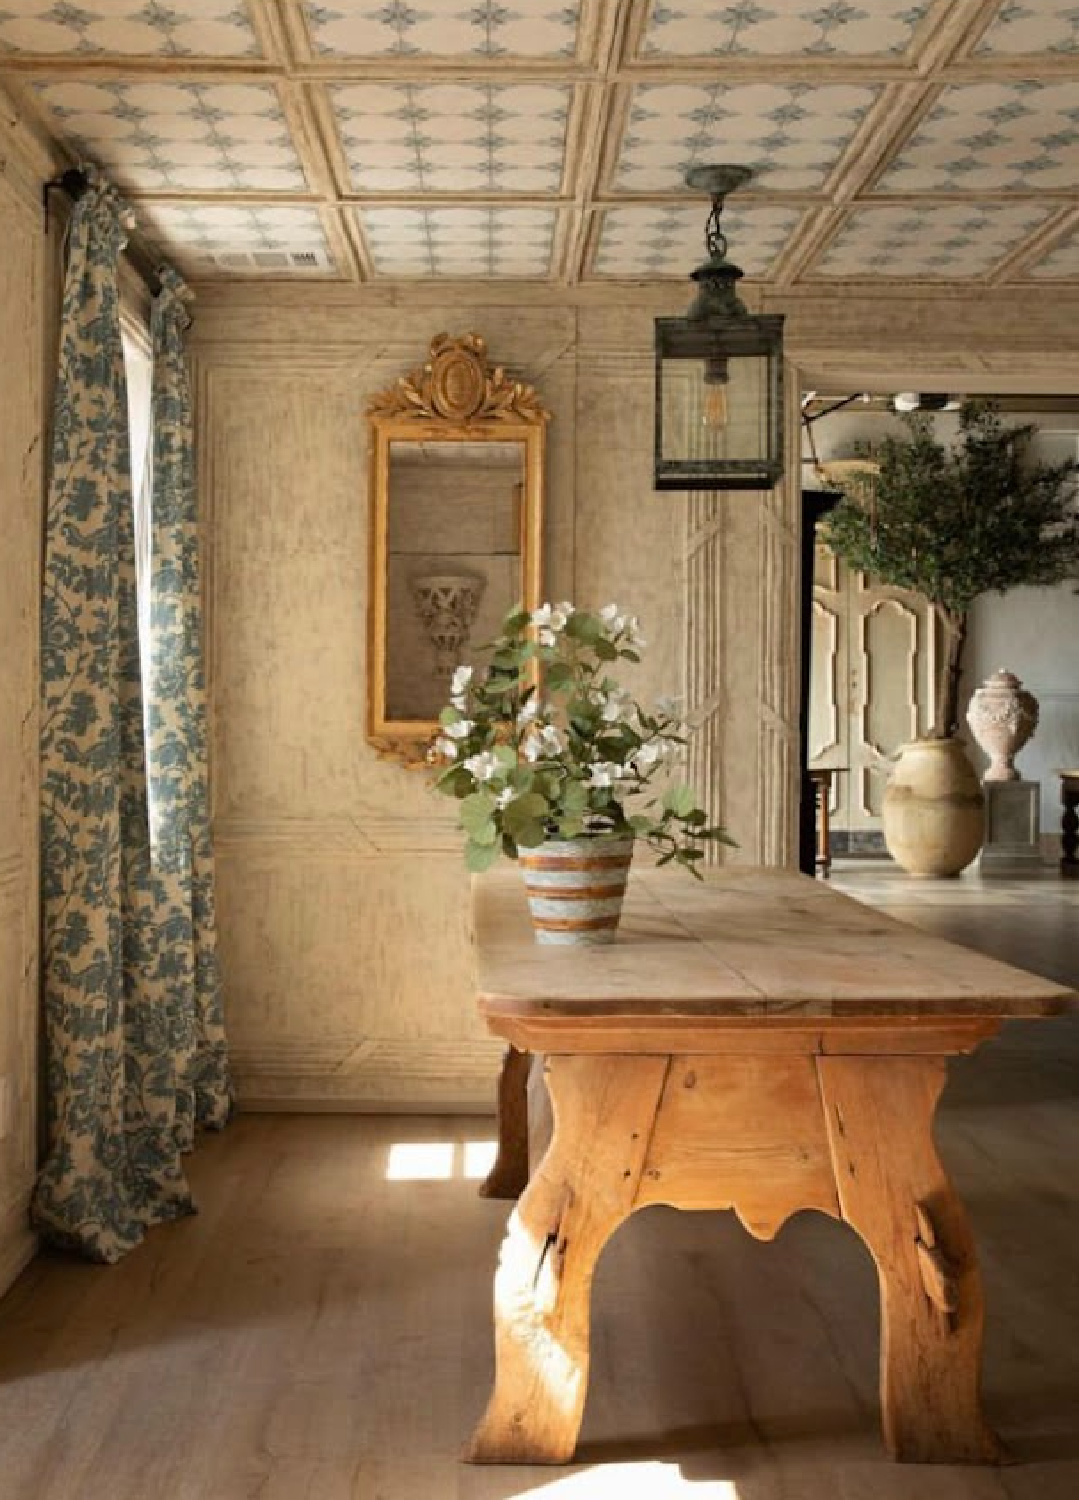 Casa Gusto. Gusto Paneled Papier-mâché - everything from the walls to the ceiling.